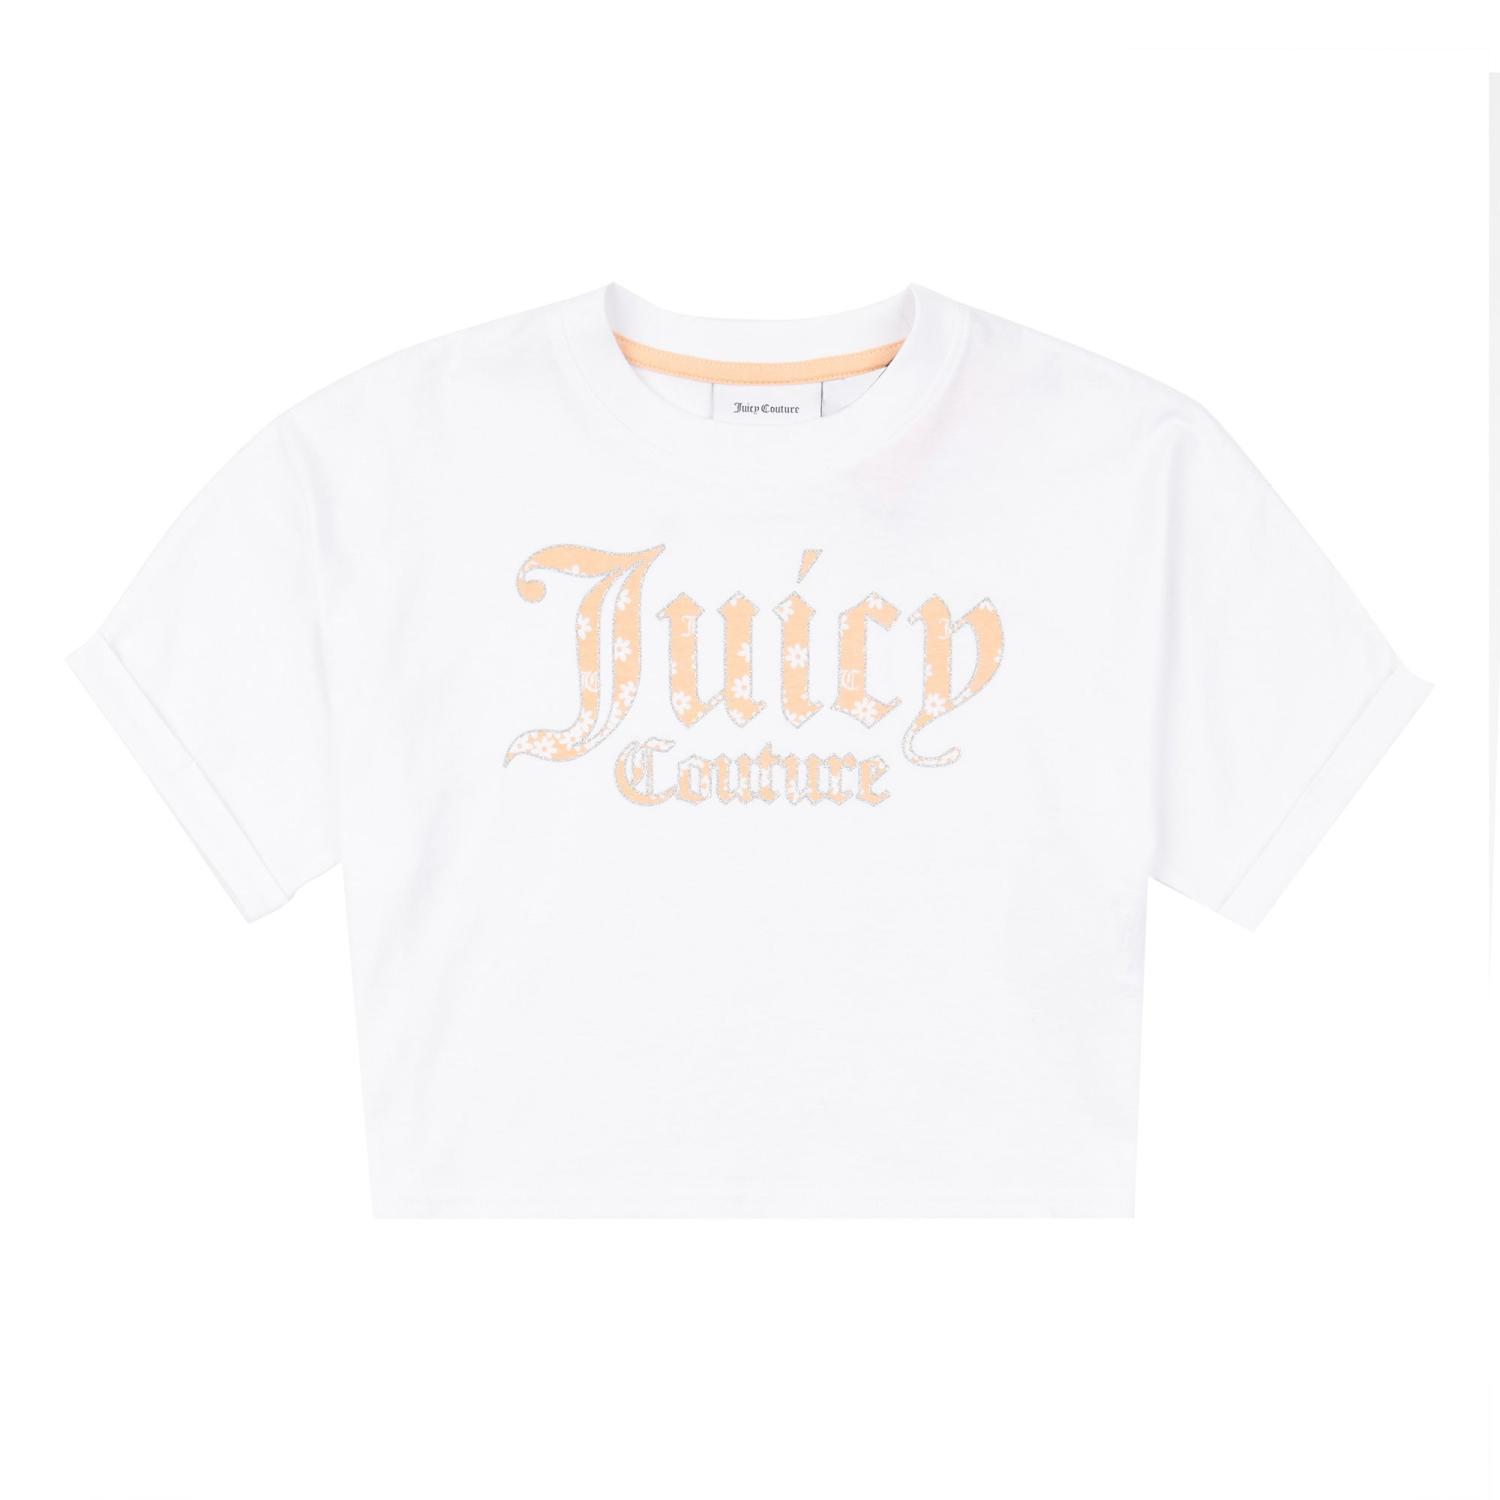 JUICY COUTURE ARTWORK TEE BRIGHT WHITE